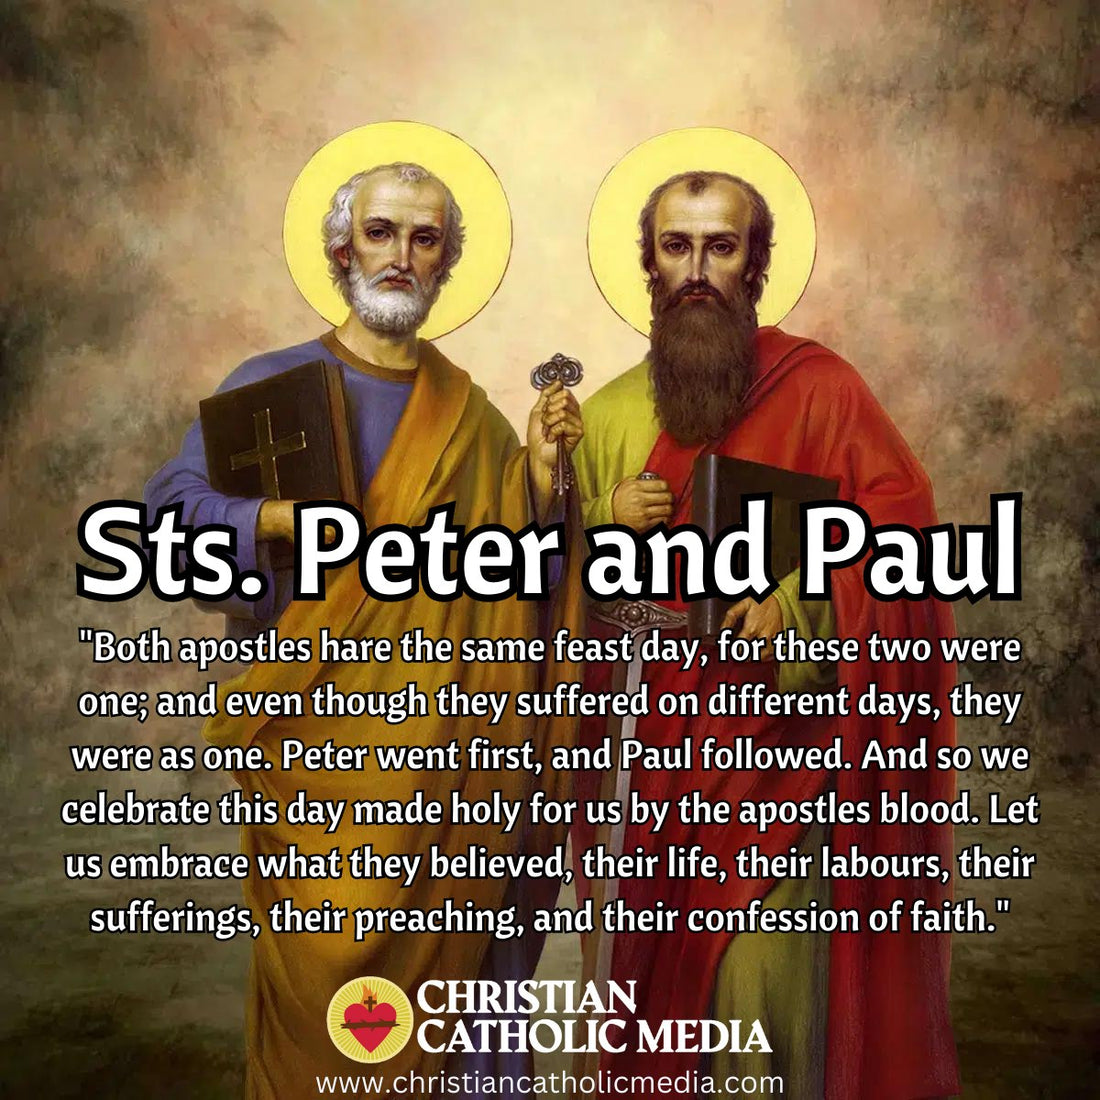 St. Peter and Paul - Wednesday June 29, 2022